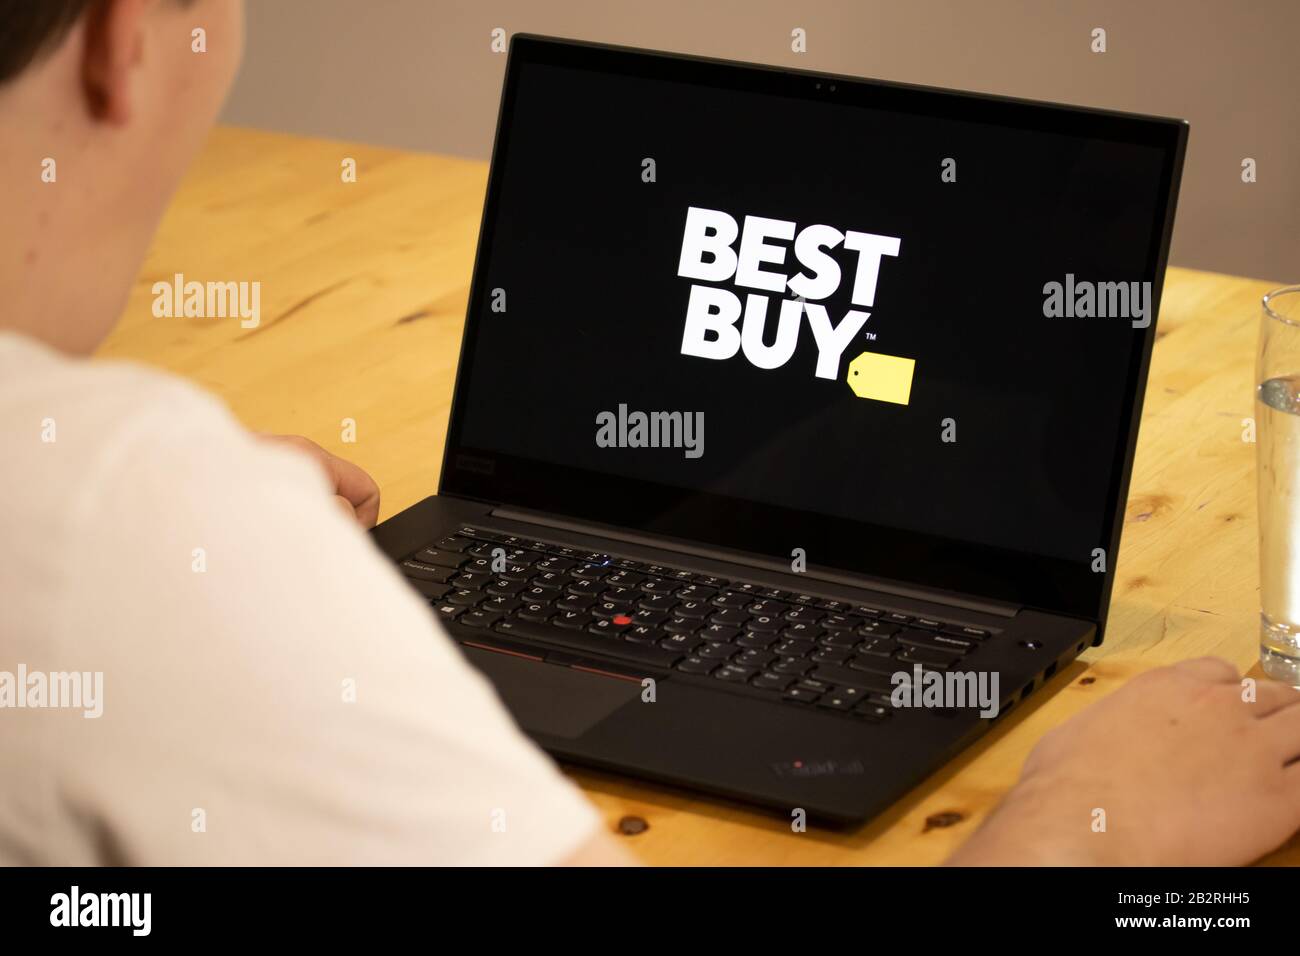 Man sitting at a desk using a laptop with the Best Buy logo on-screen. Stock Photo